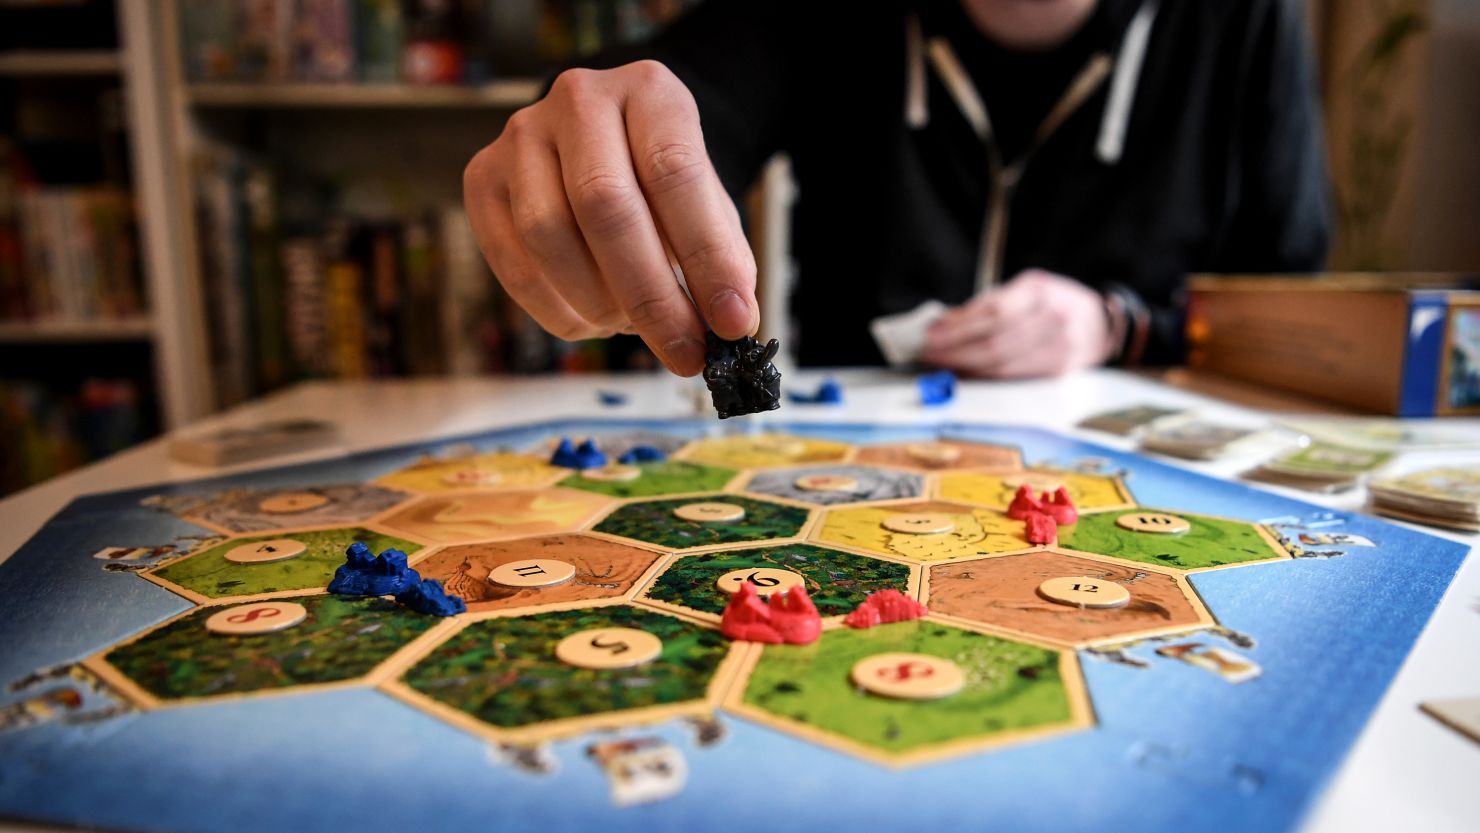 A player places one of their game pieces on the board in CATAN.